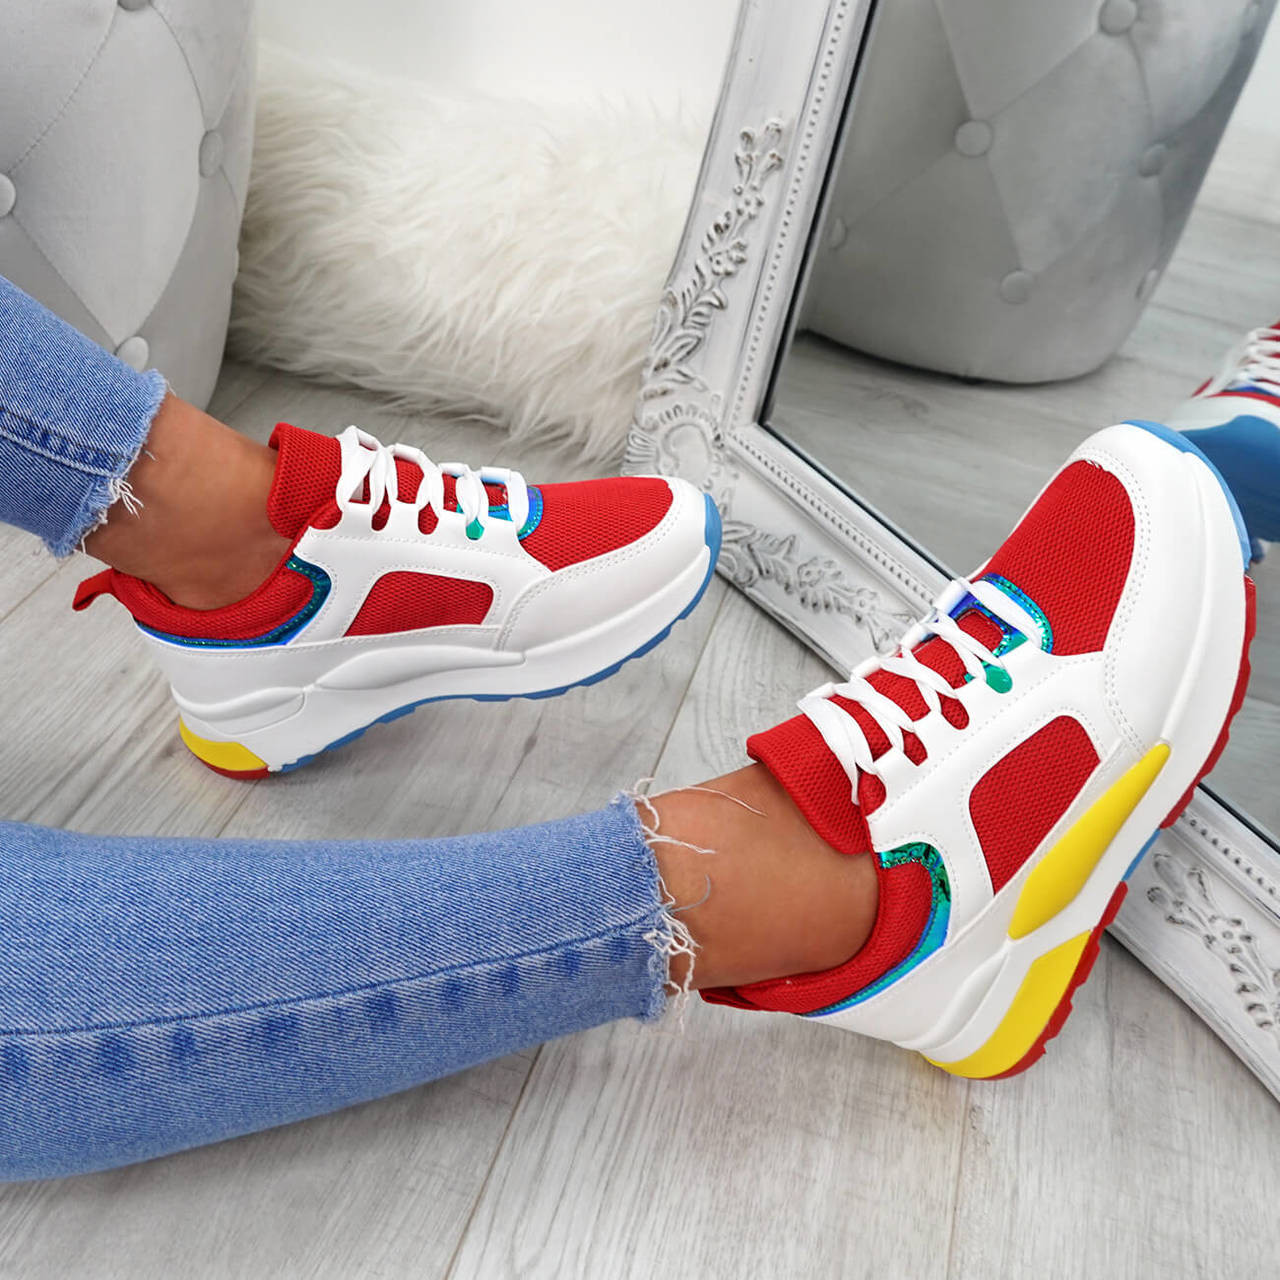 fashionable trainers for ladies